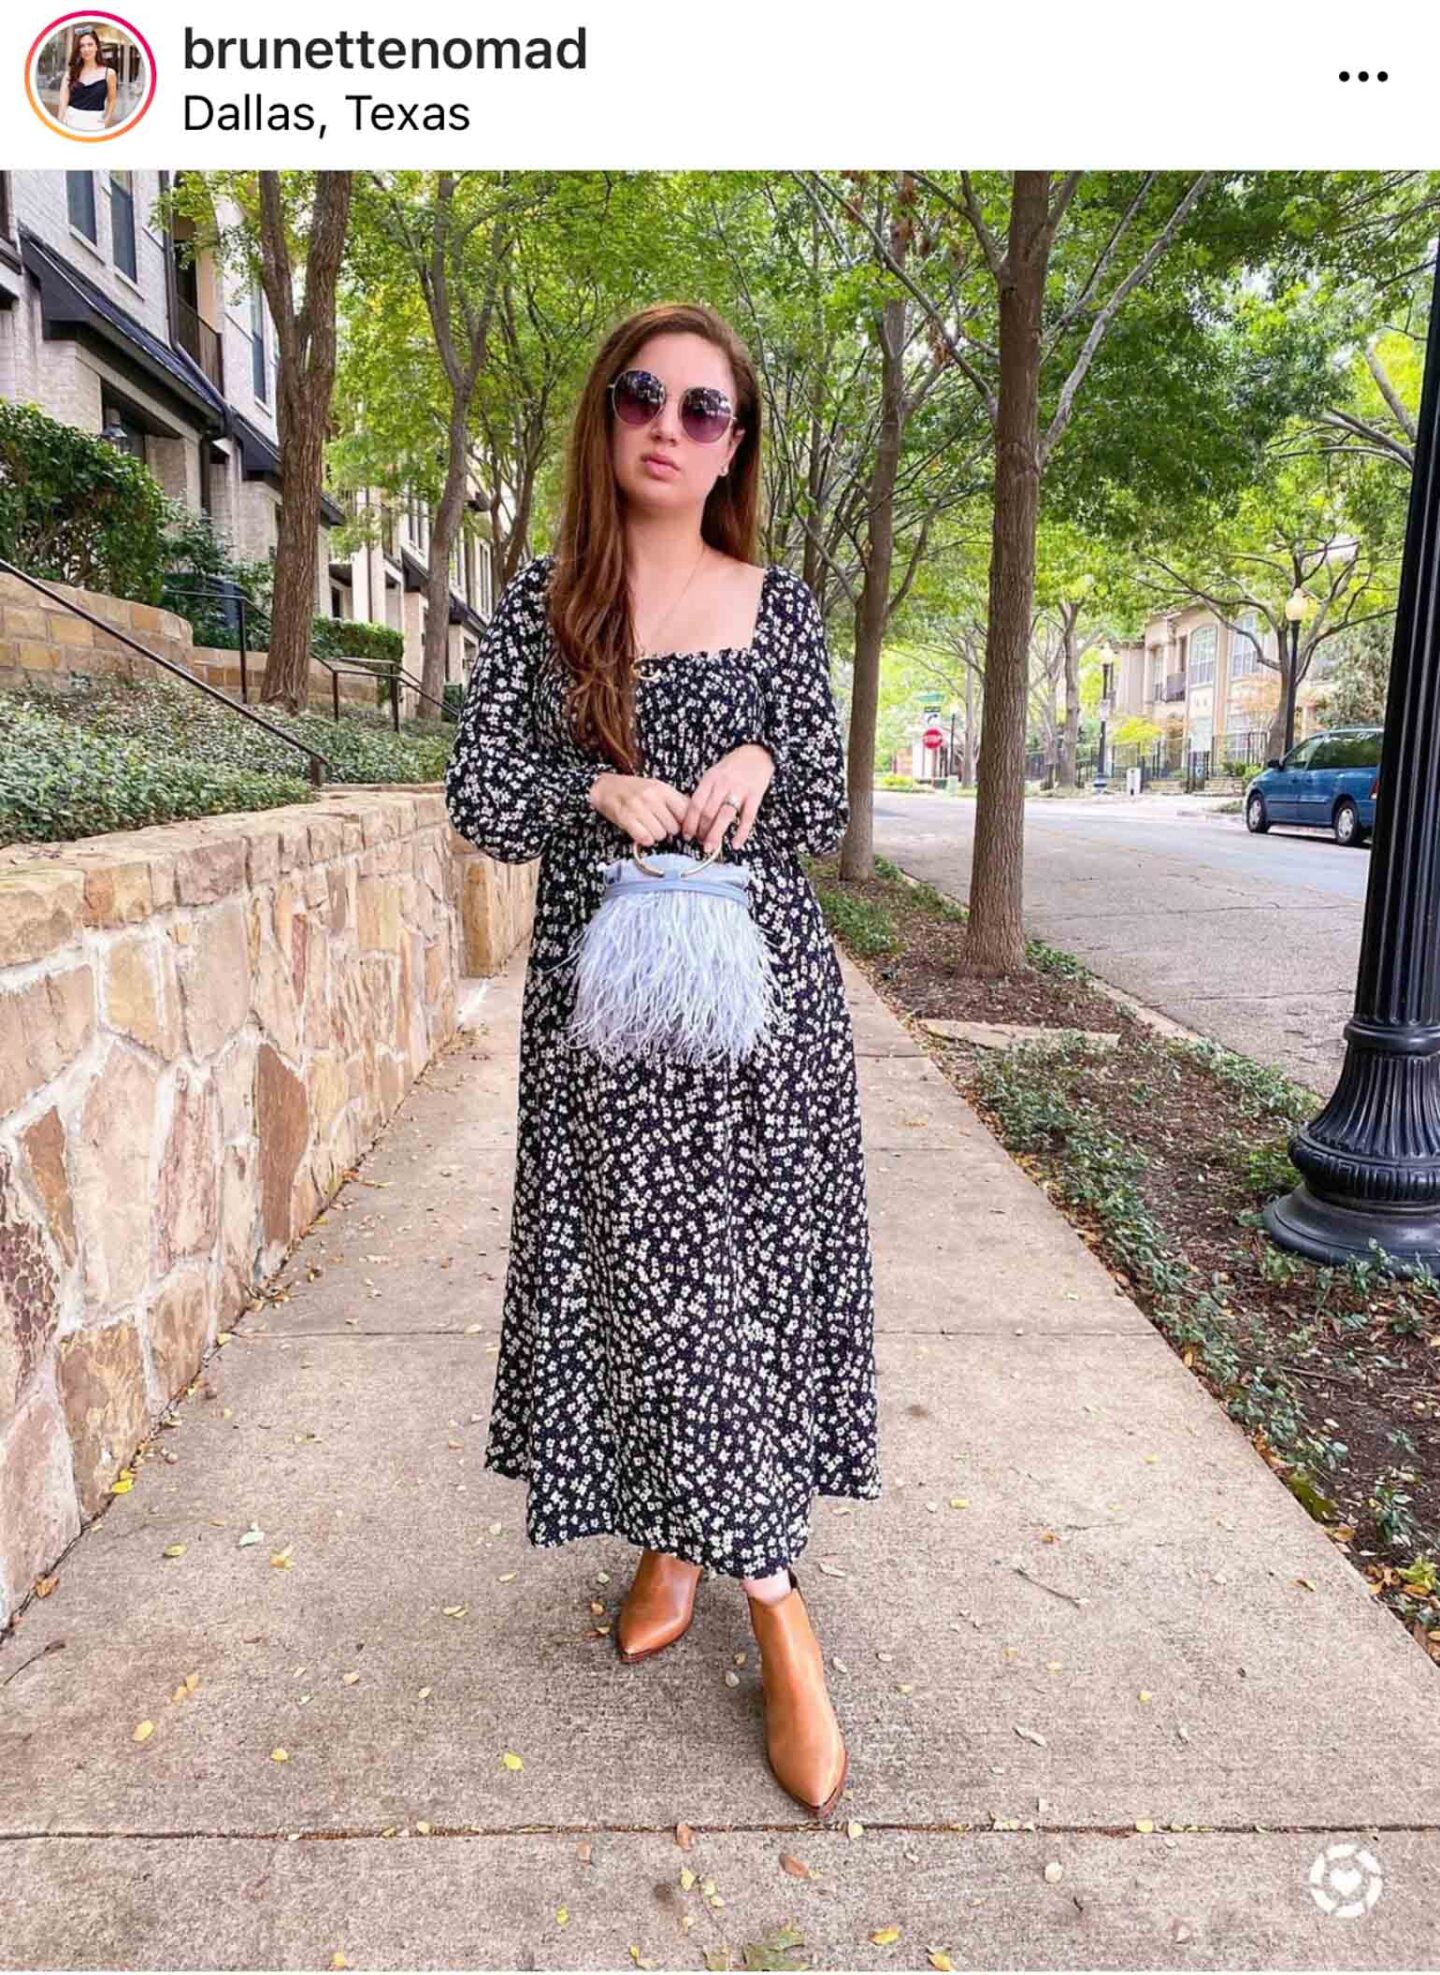 Dallas fashion blogger shares fall and winter outfit inspiration - floral midi dress and feather bag